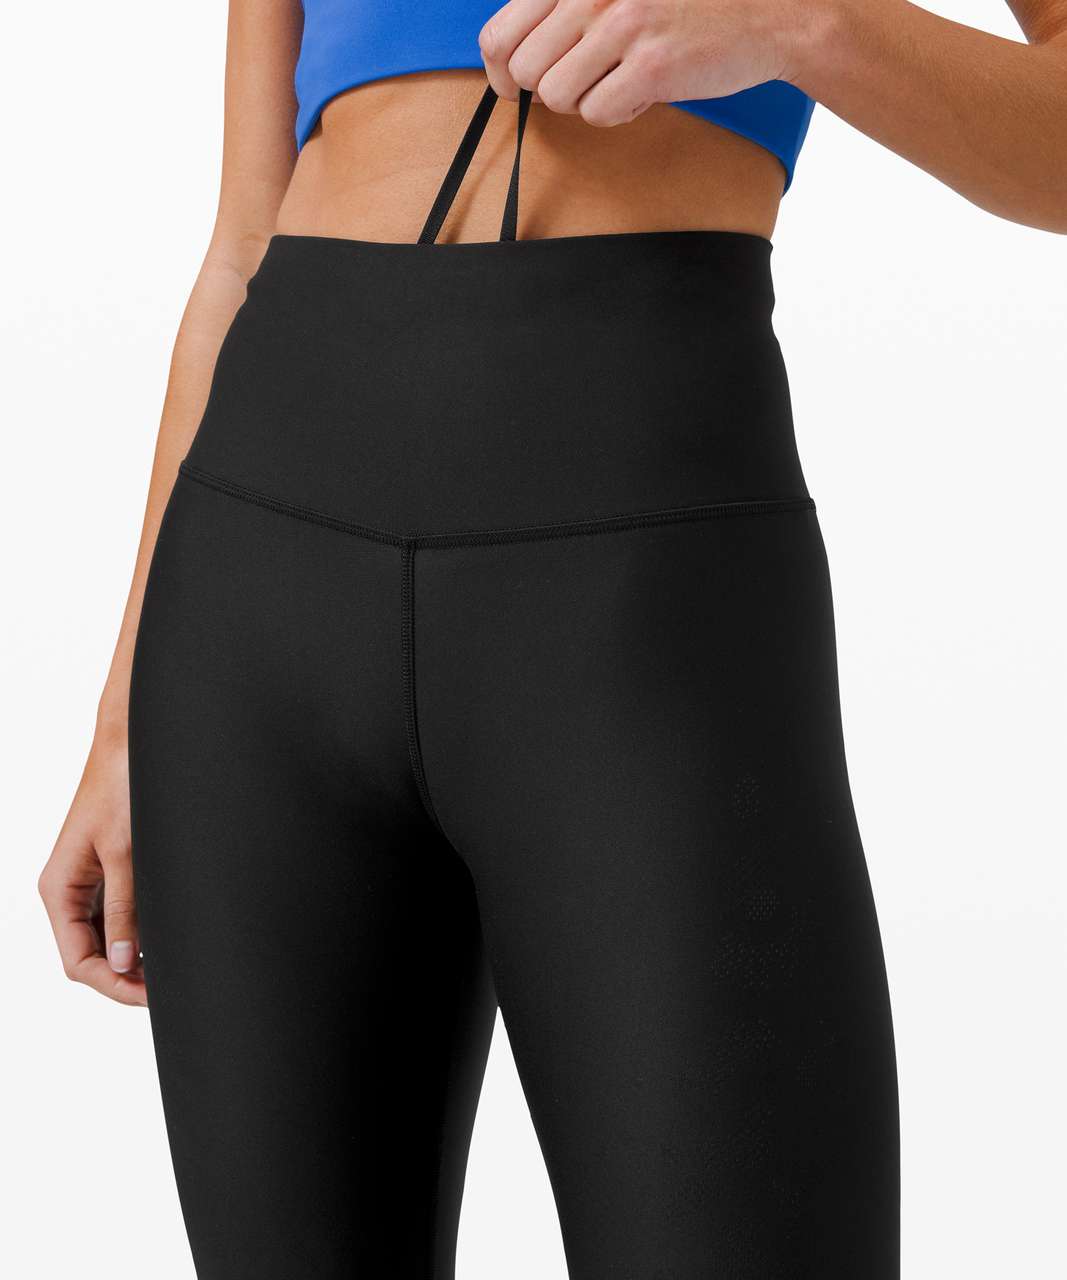 Lululemon Mapped Out High Rise Tight 28" *Camo - Black / Black